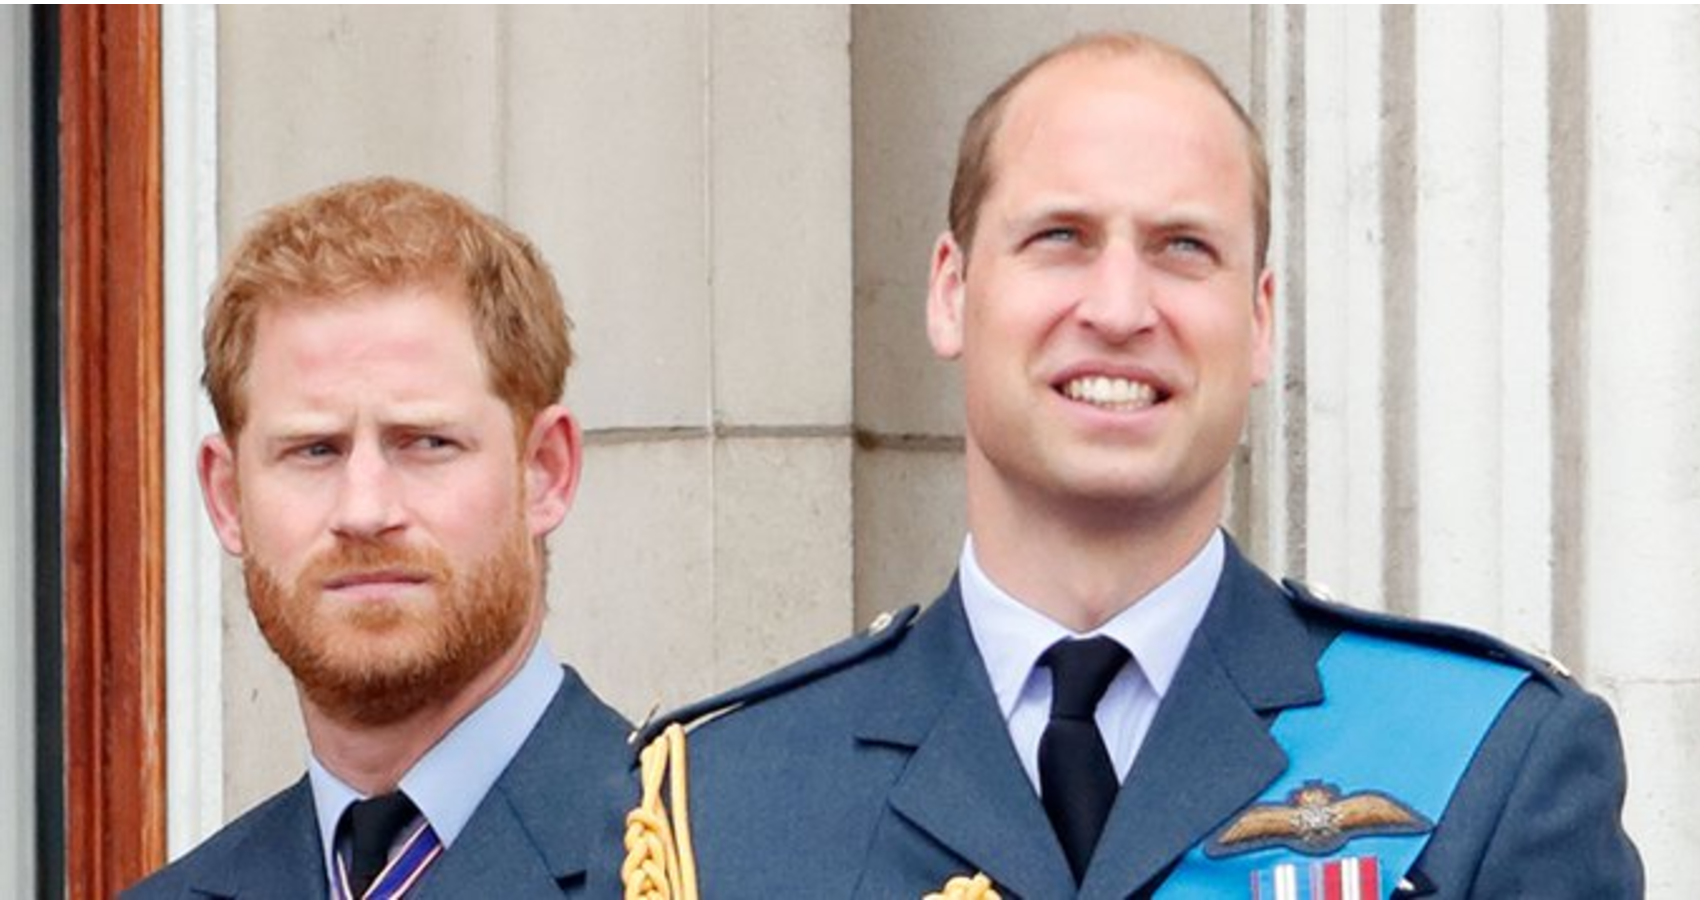 Book Reveals Prince William Try To Avoid Lunch With Prince Harry